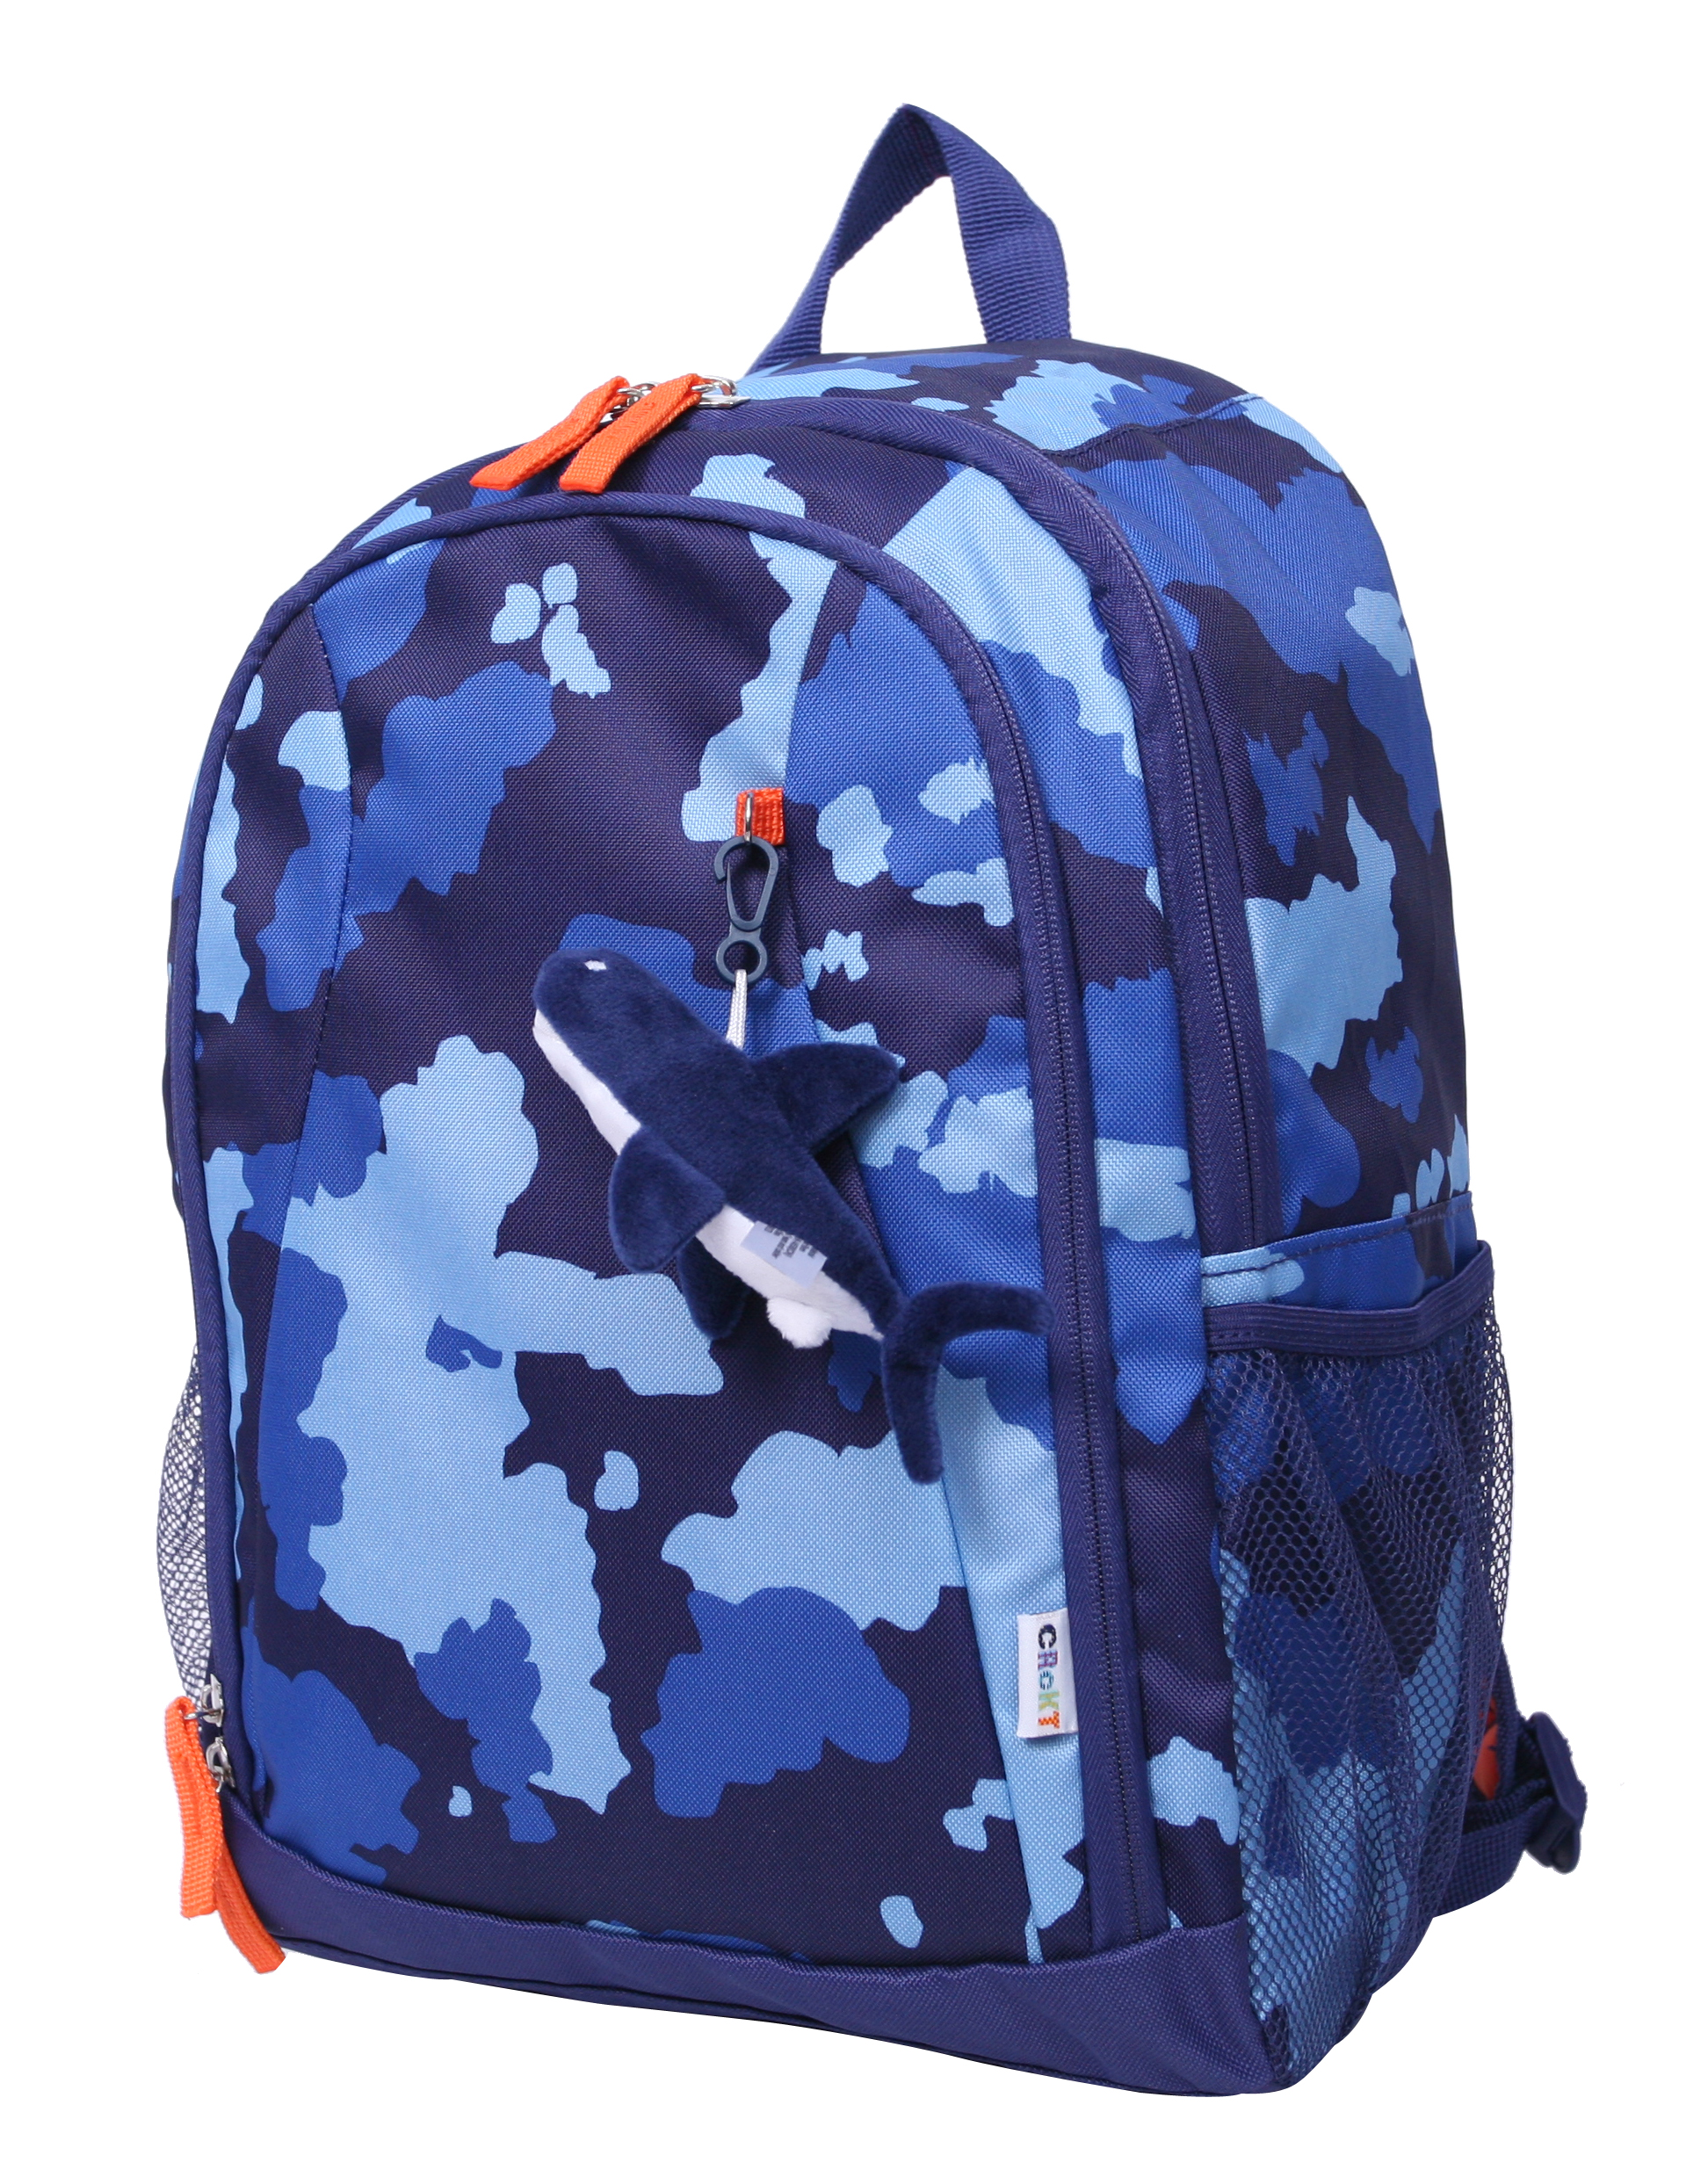 Crckt Kids Boys 15" School Backpack with Plush Dangle, Blue Camo Print - image 1 of 8